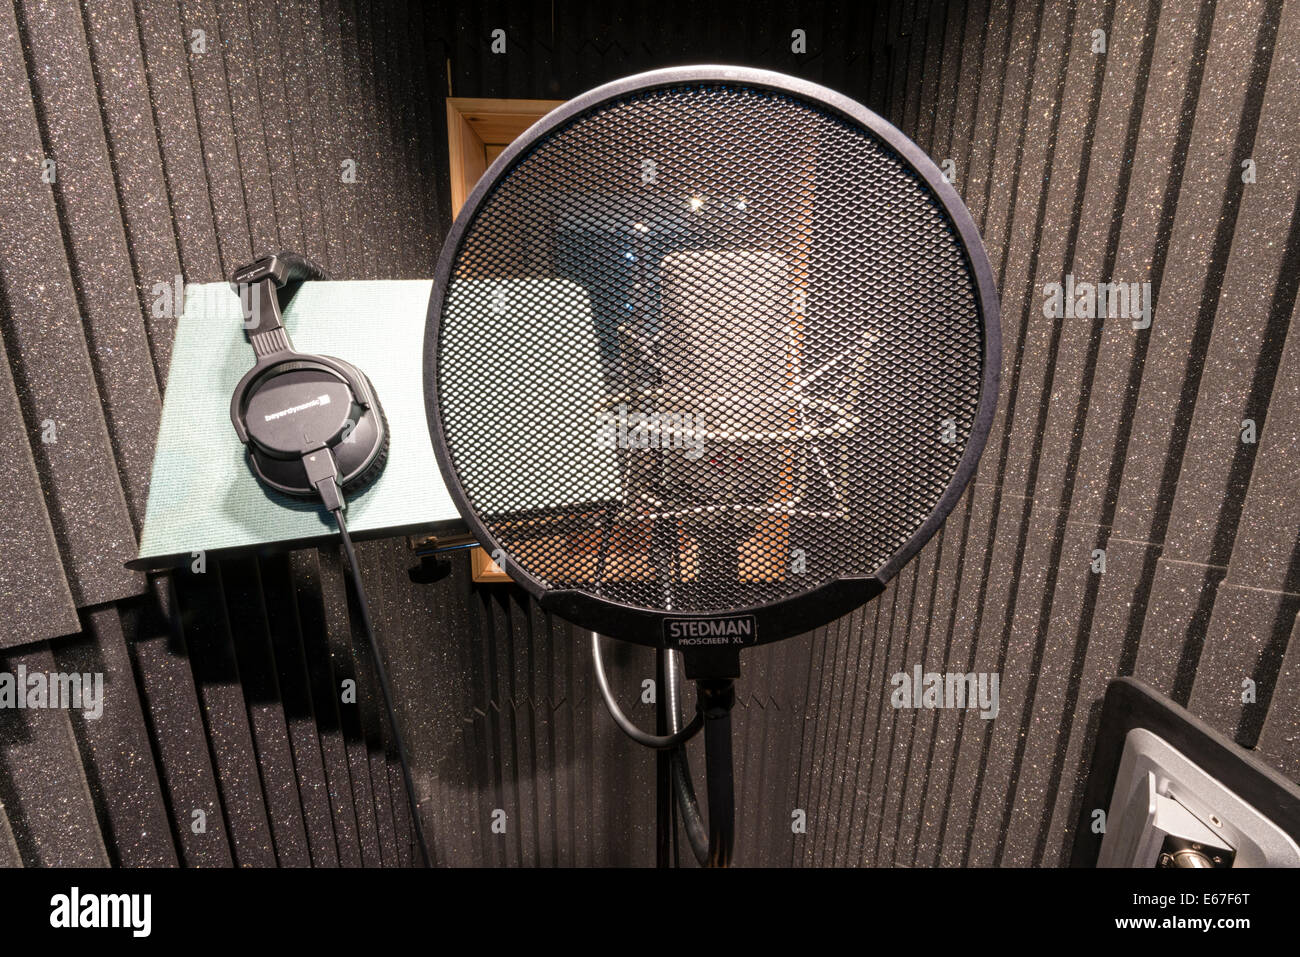 A neuman microphone in a vocal booth in a music recording studio with a pop shield in front Stock Photo